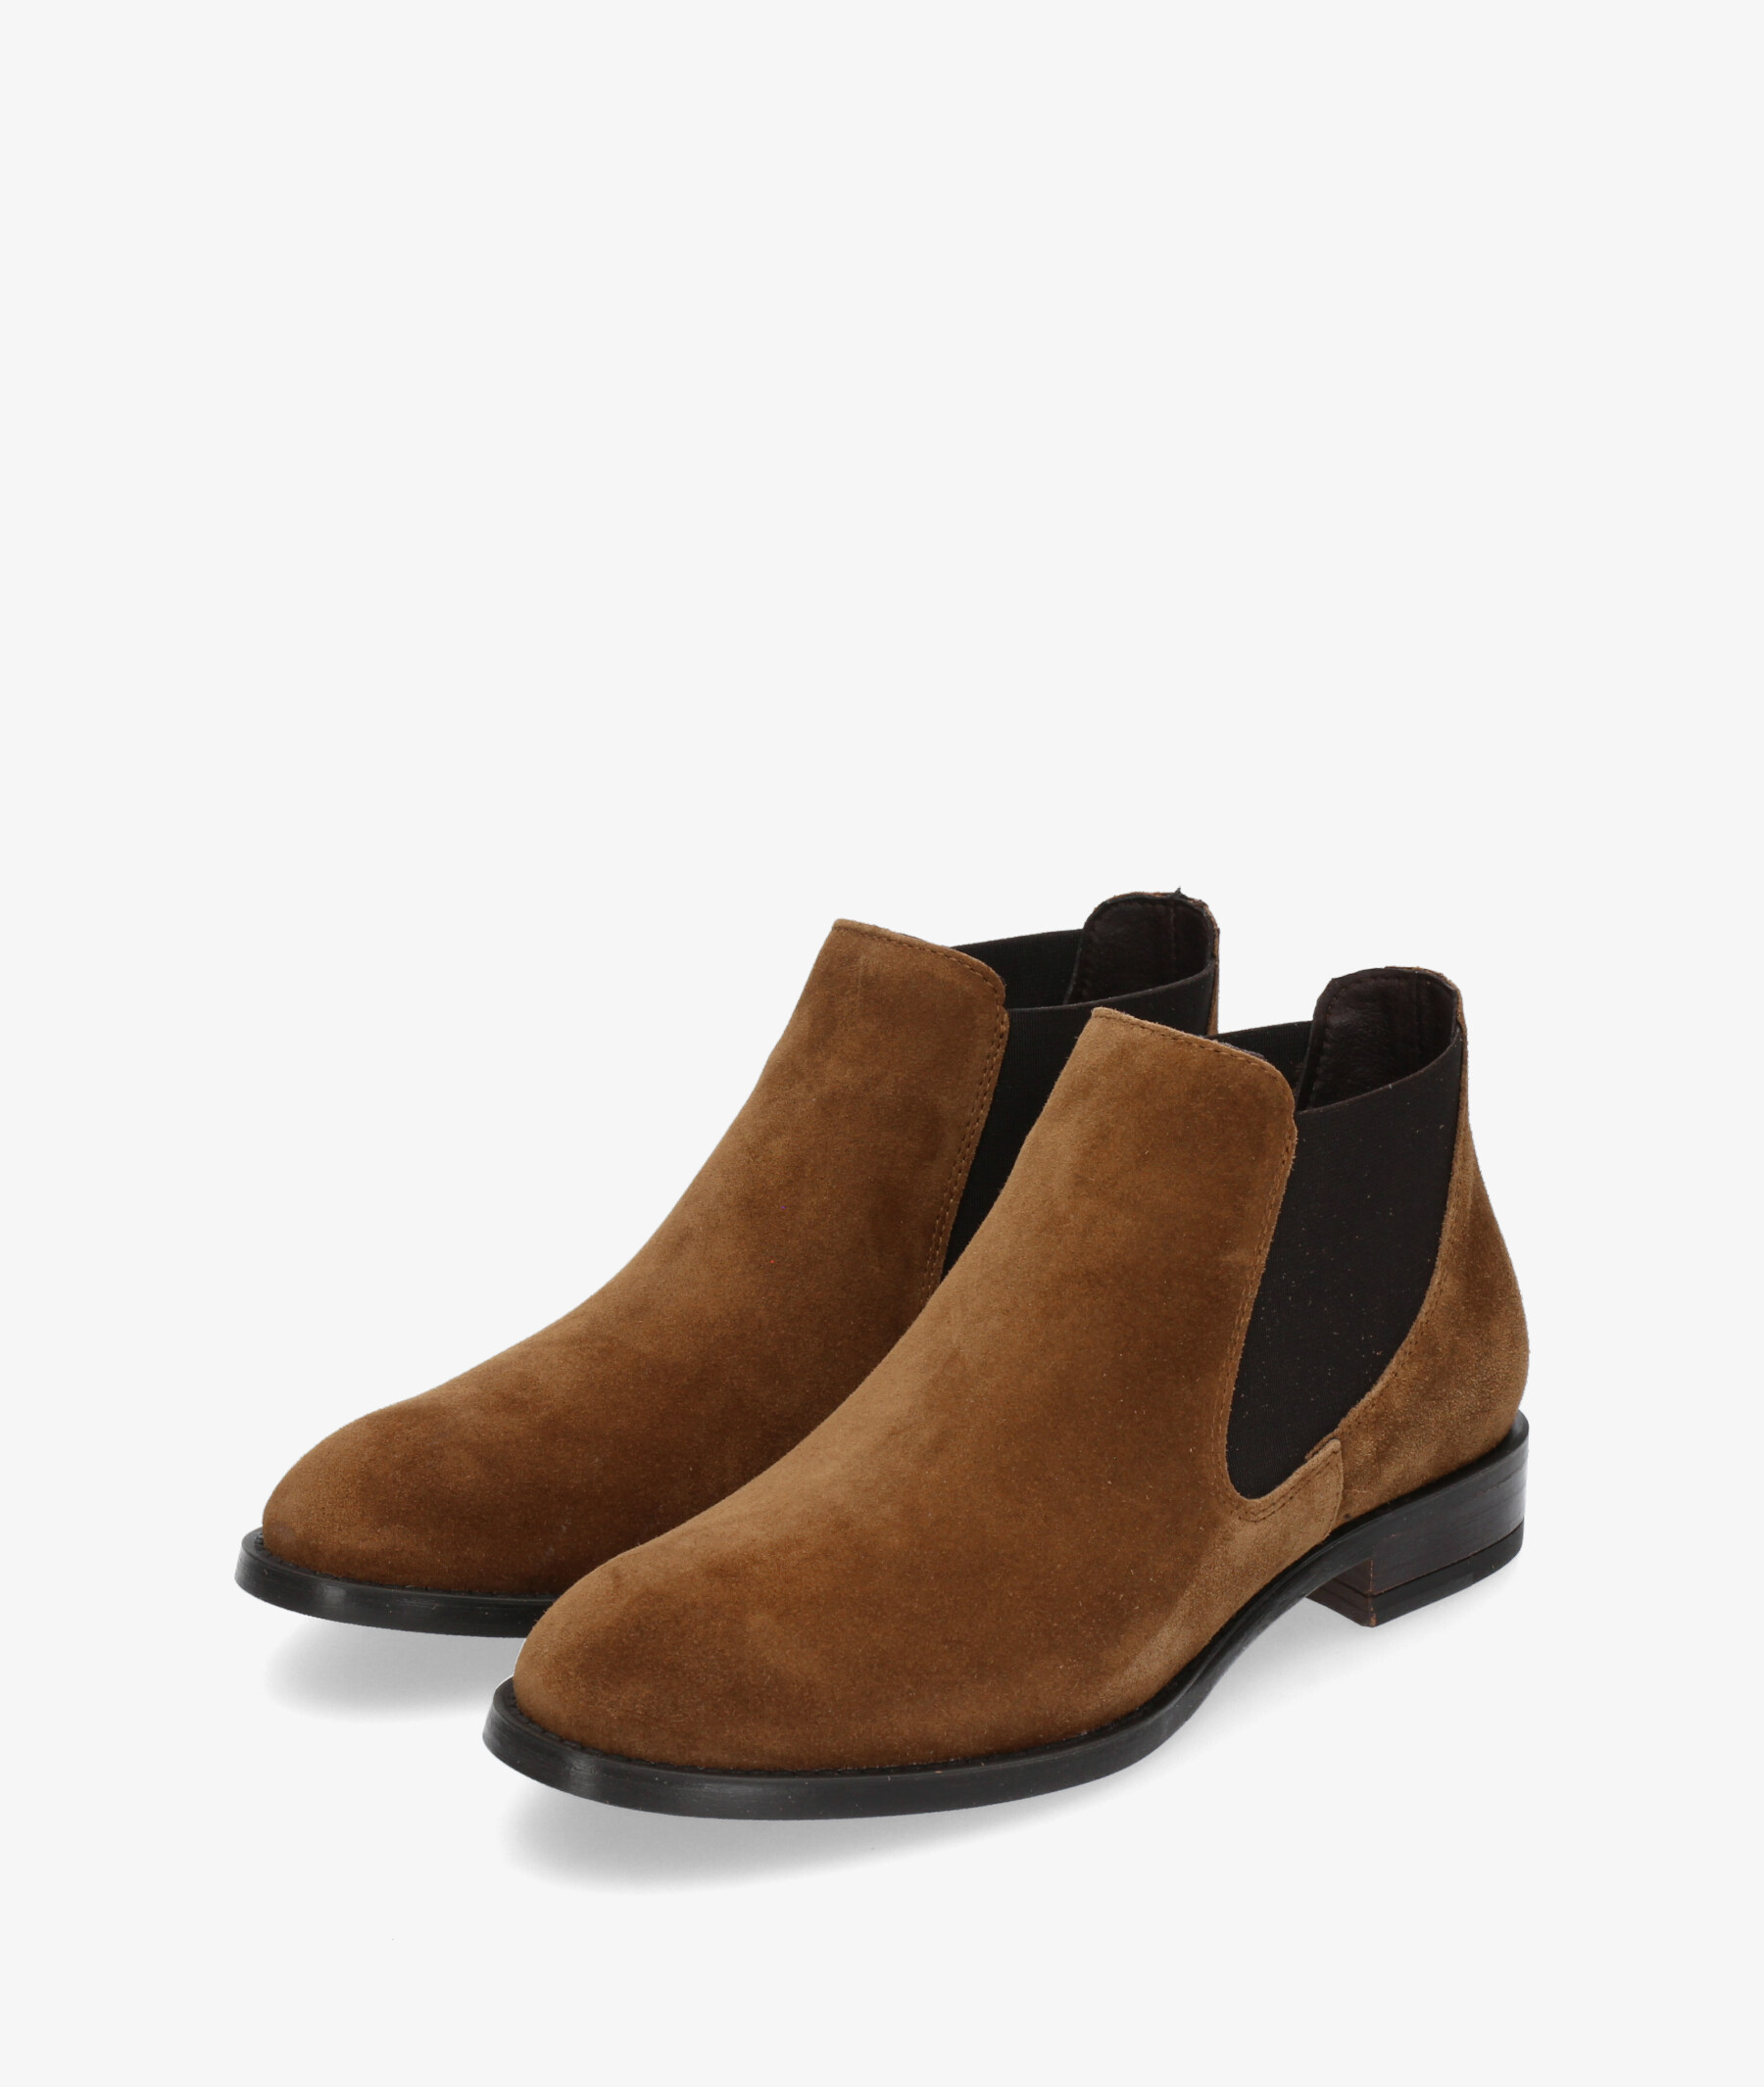 Alpe Suede Leather Ankle Boots 2646 cuero image 1